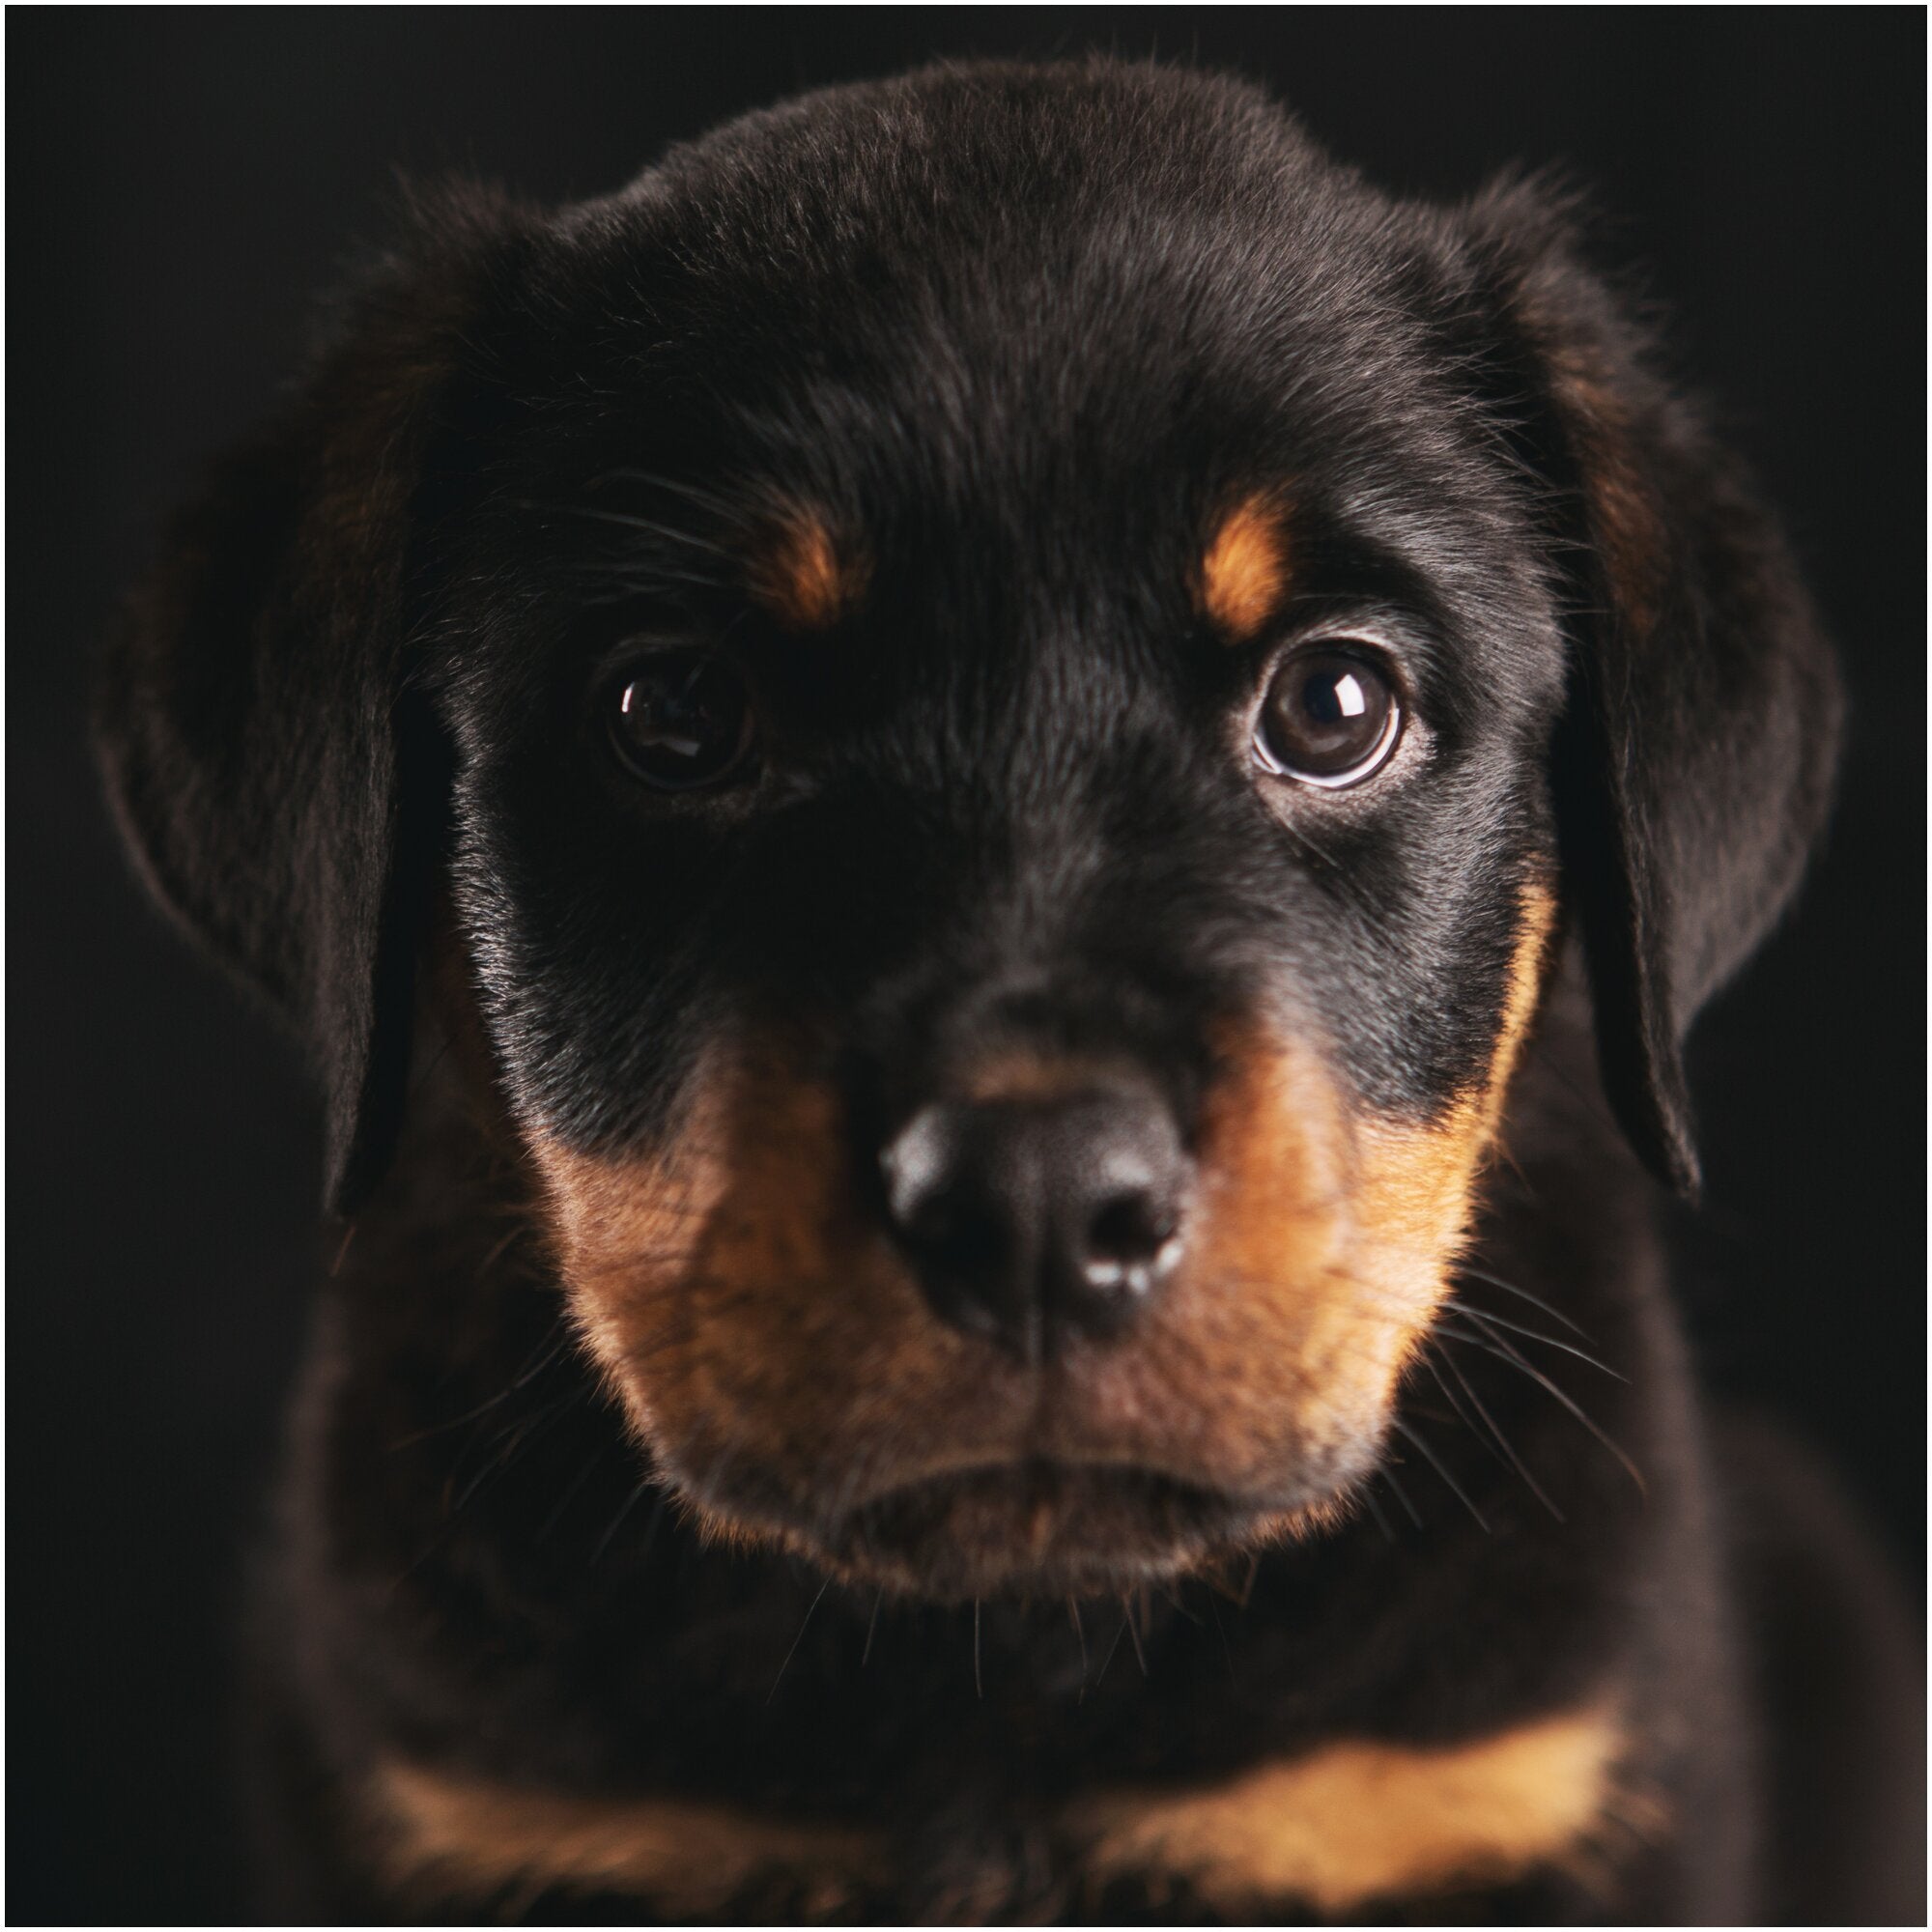 Cute, black puppy is staring at the camera.